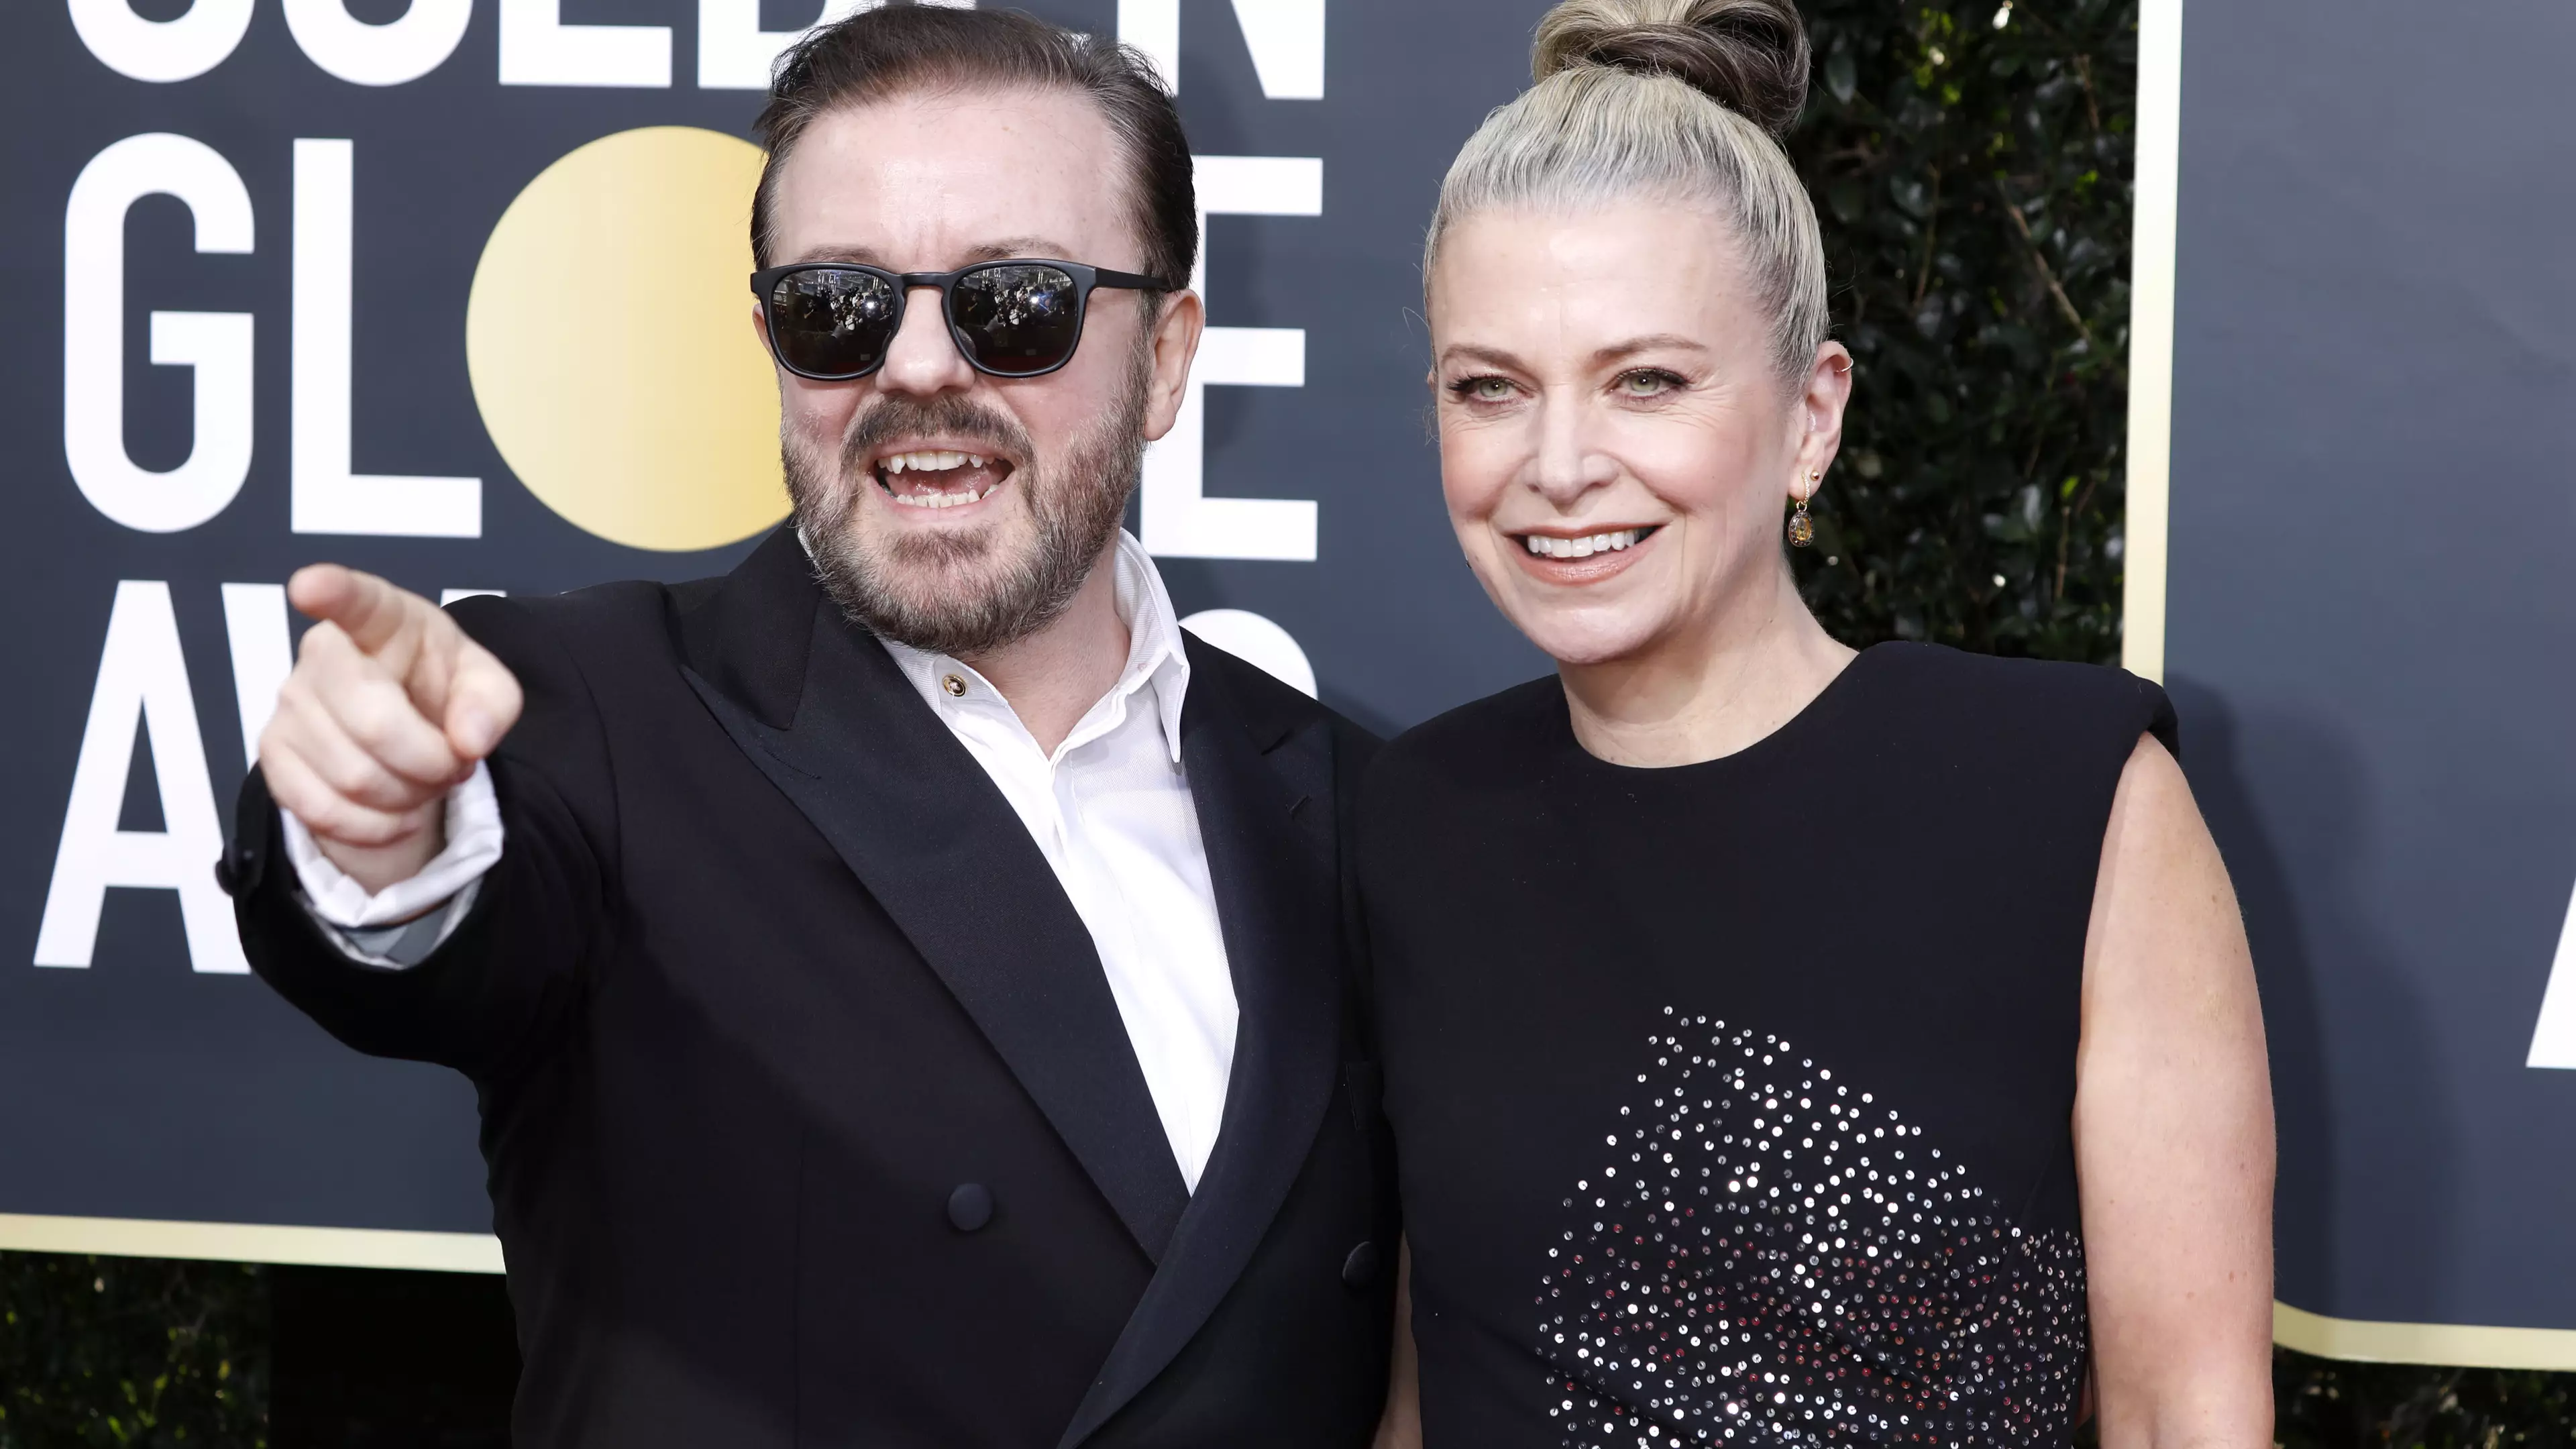 How Well Do You Know Ricky Gervais' Best Golden Globes Moments?